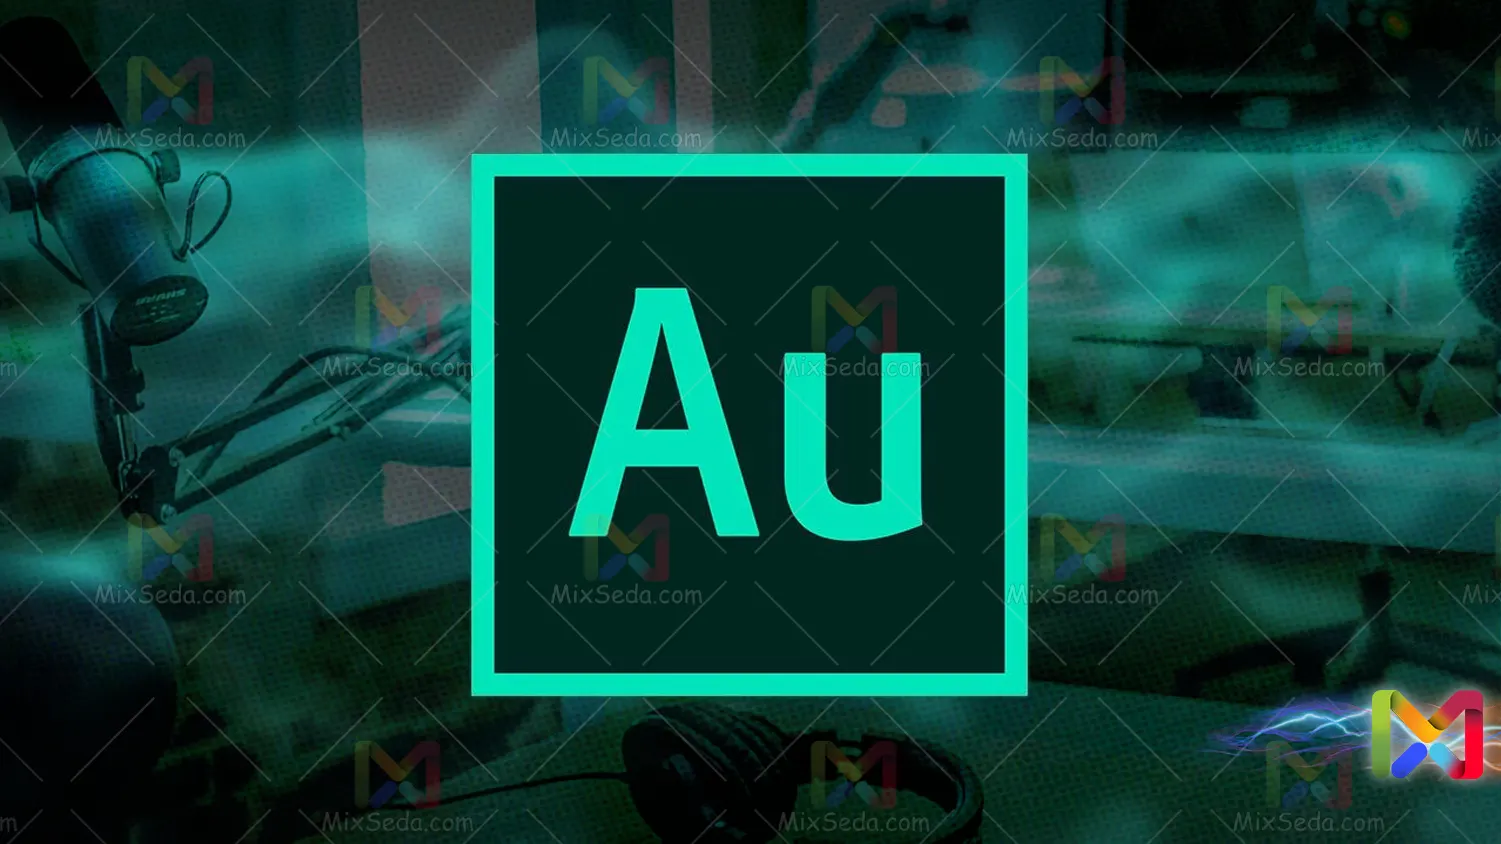 Introducing Adobe Audition software